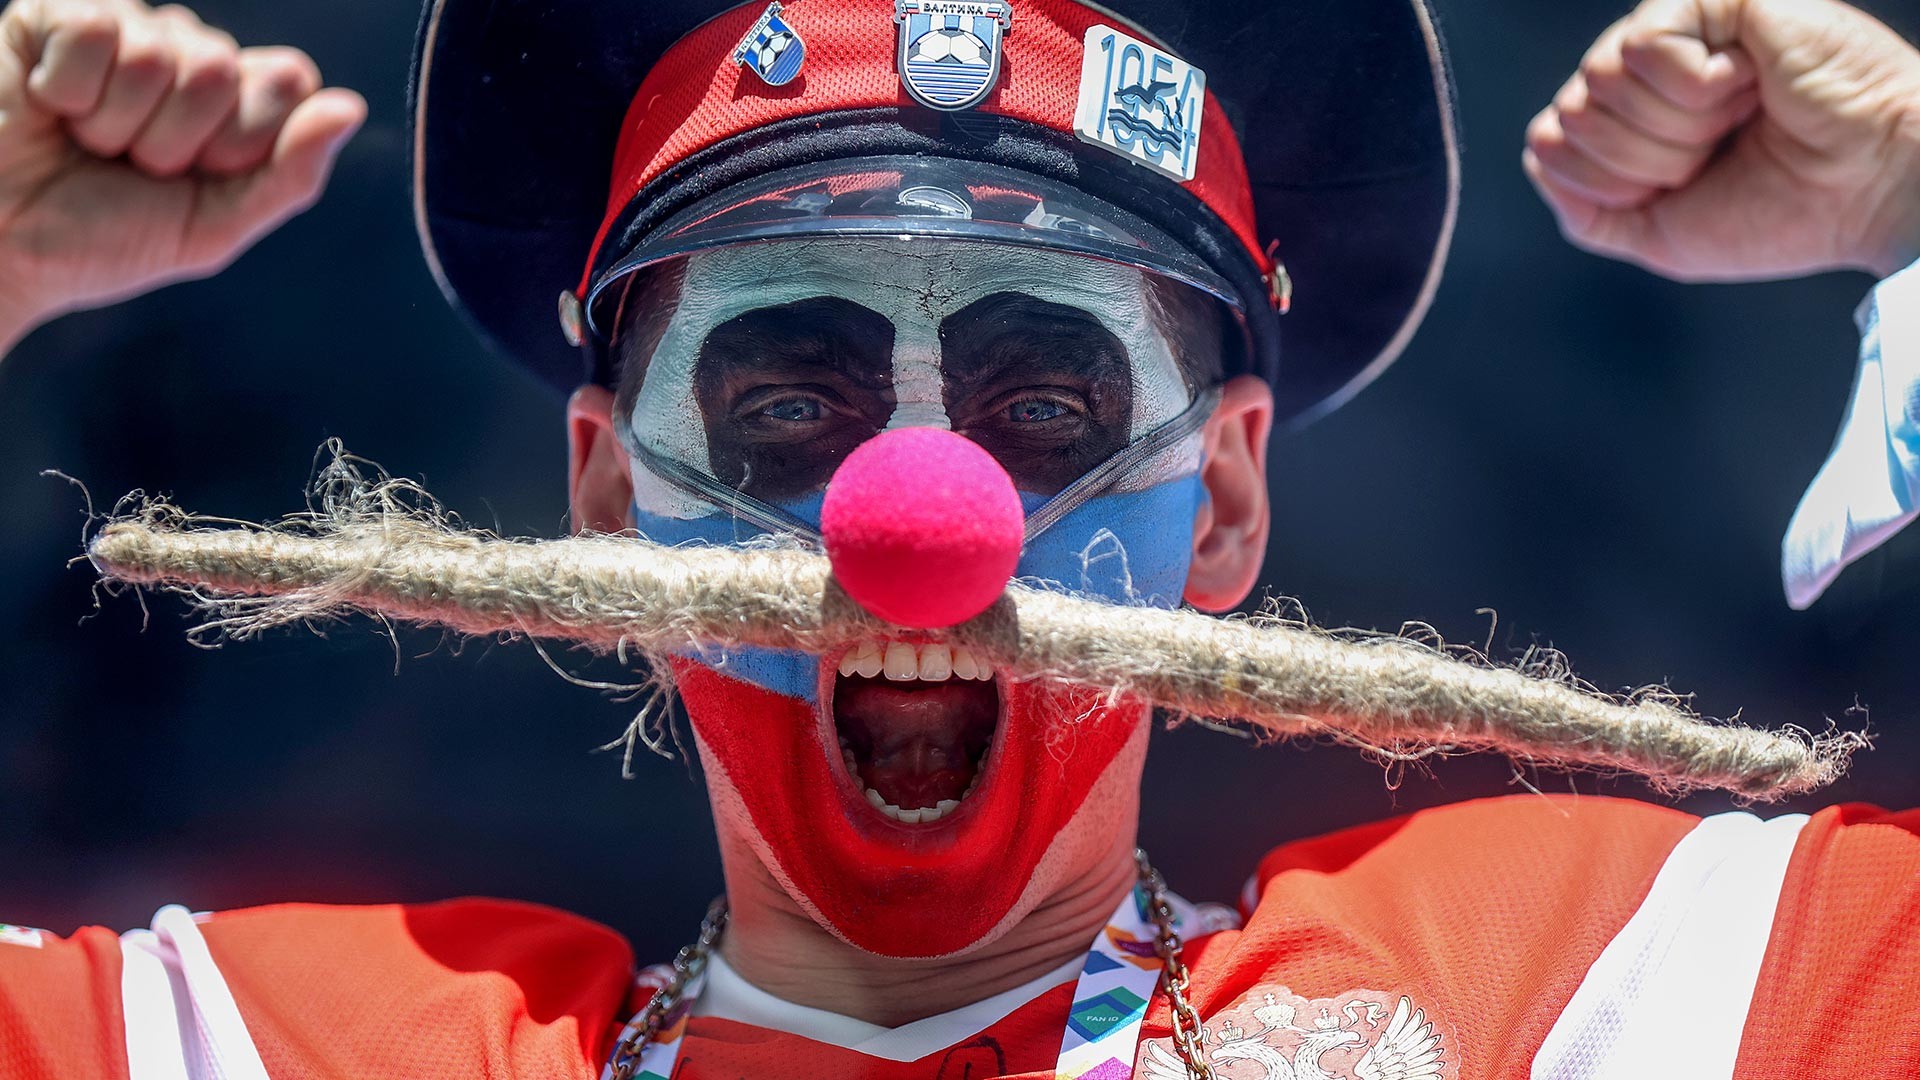 A Russia fan shows their support prior to the UEFA Euro 2020 Championship Group B match between Finland and Russia at Saint Petersburg Stadium on June 16, 2021 in Saint Petersburg, Russia.